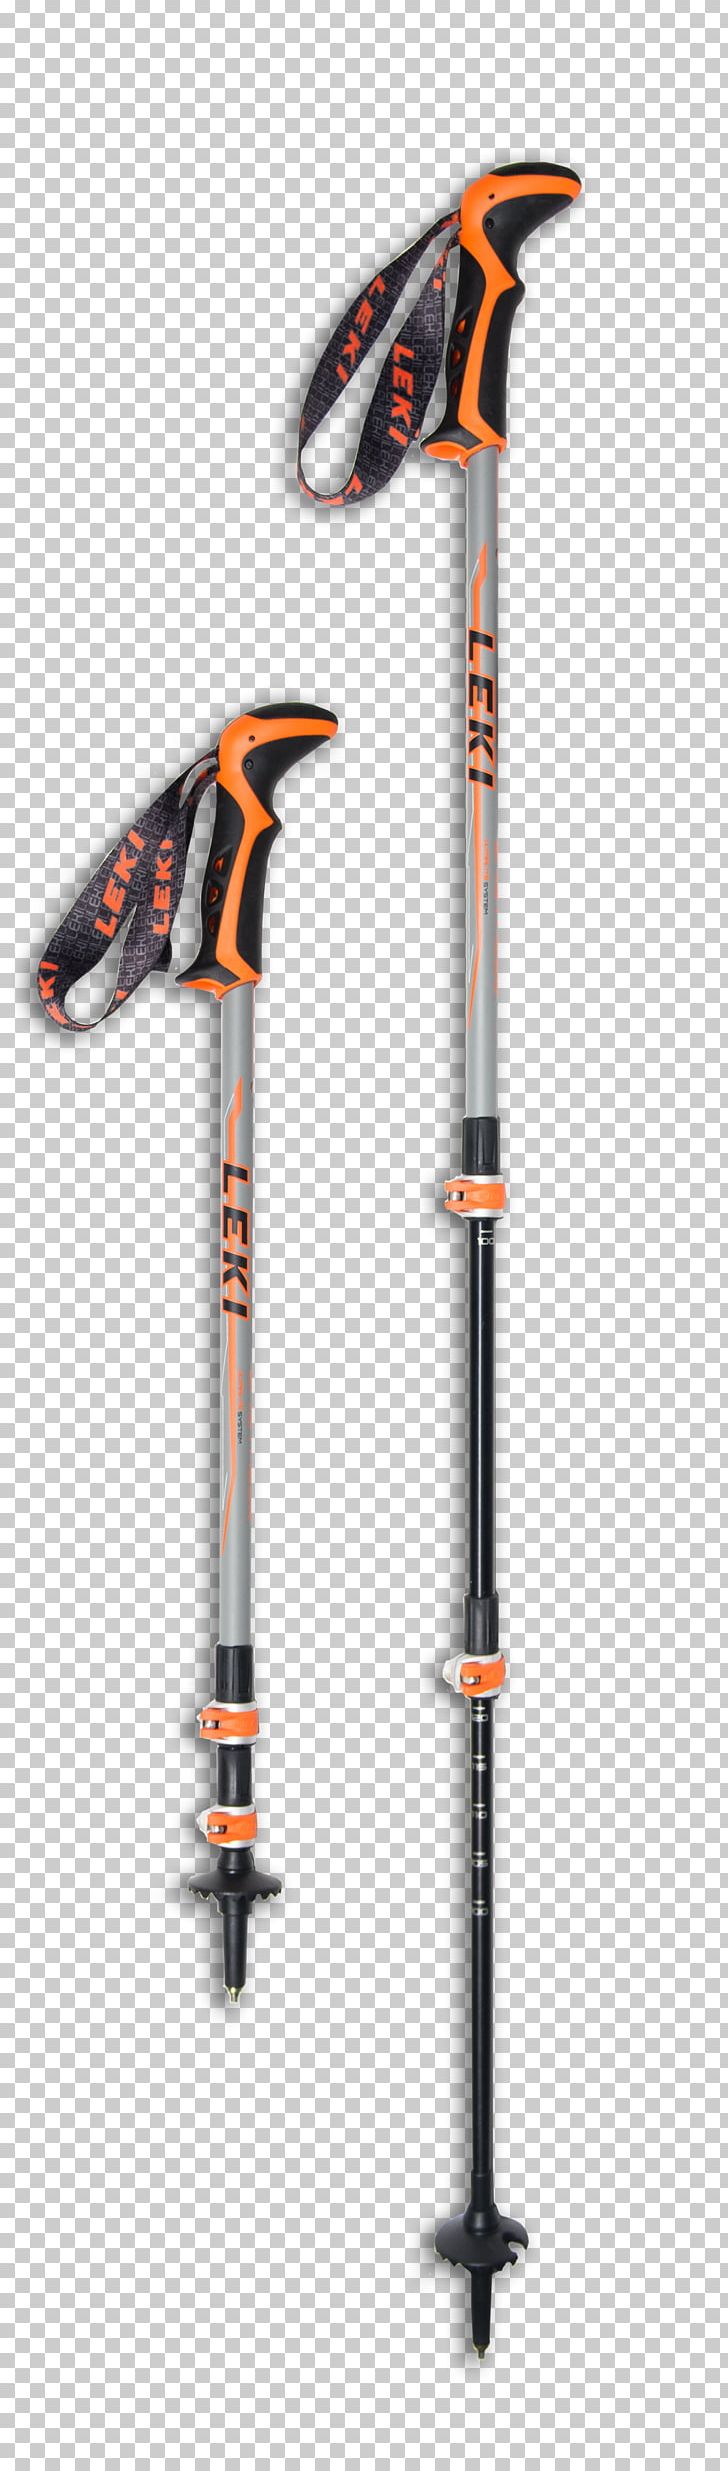 Hiking Poles Ski Poles Leki Backpacking PNG, Clipart, Backpacking, Bicycle Frame, Bicycle Part, Black Diamond Equipment, Cristallo Free PNG Download